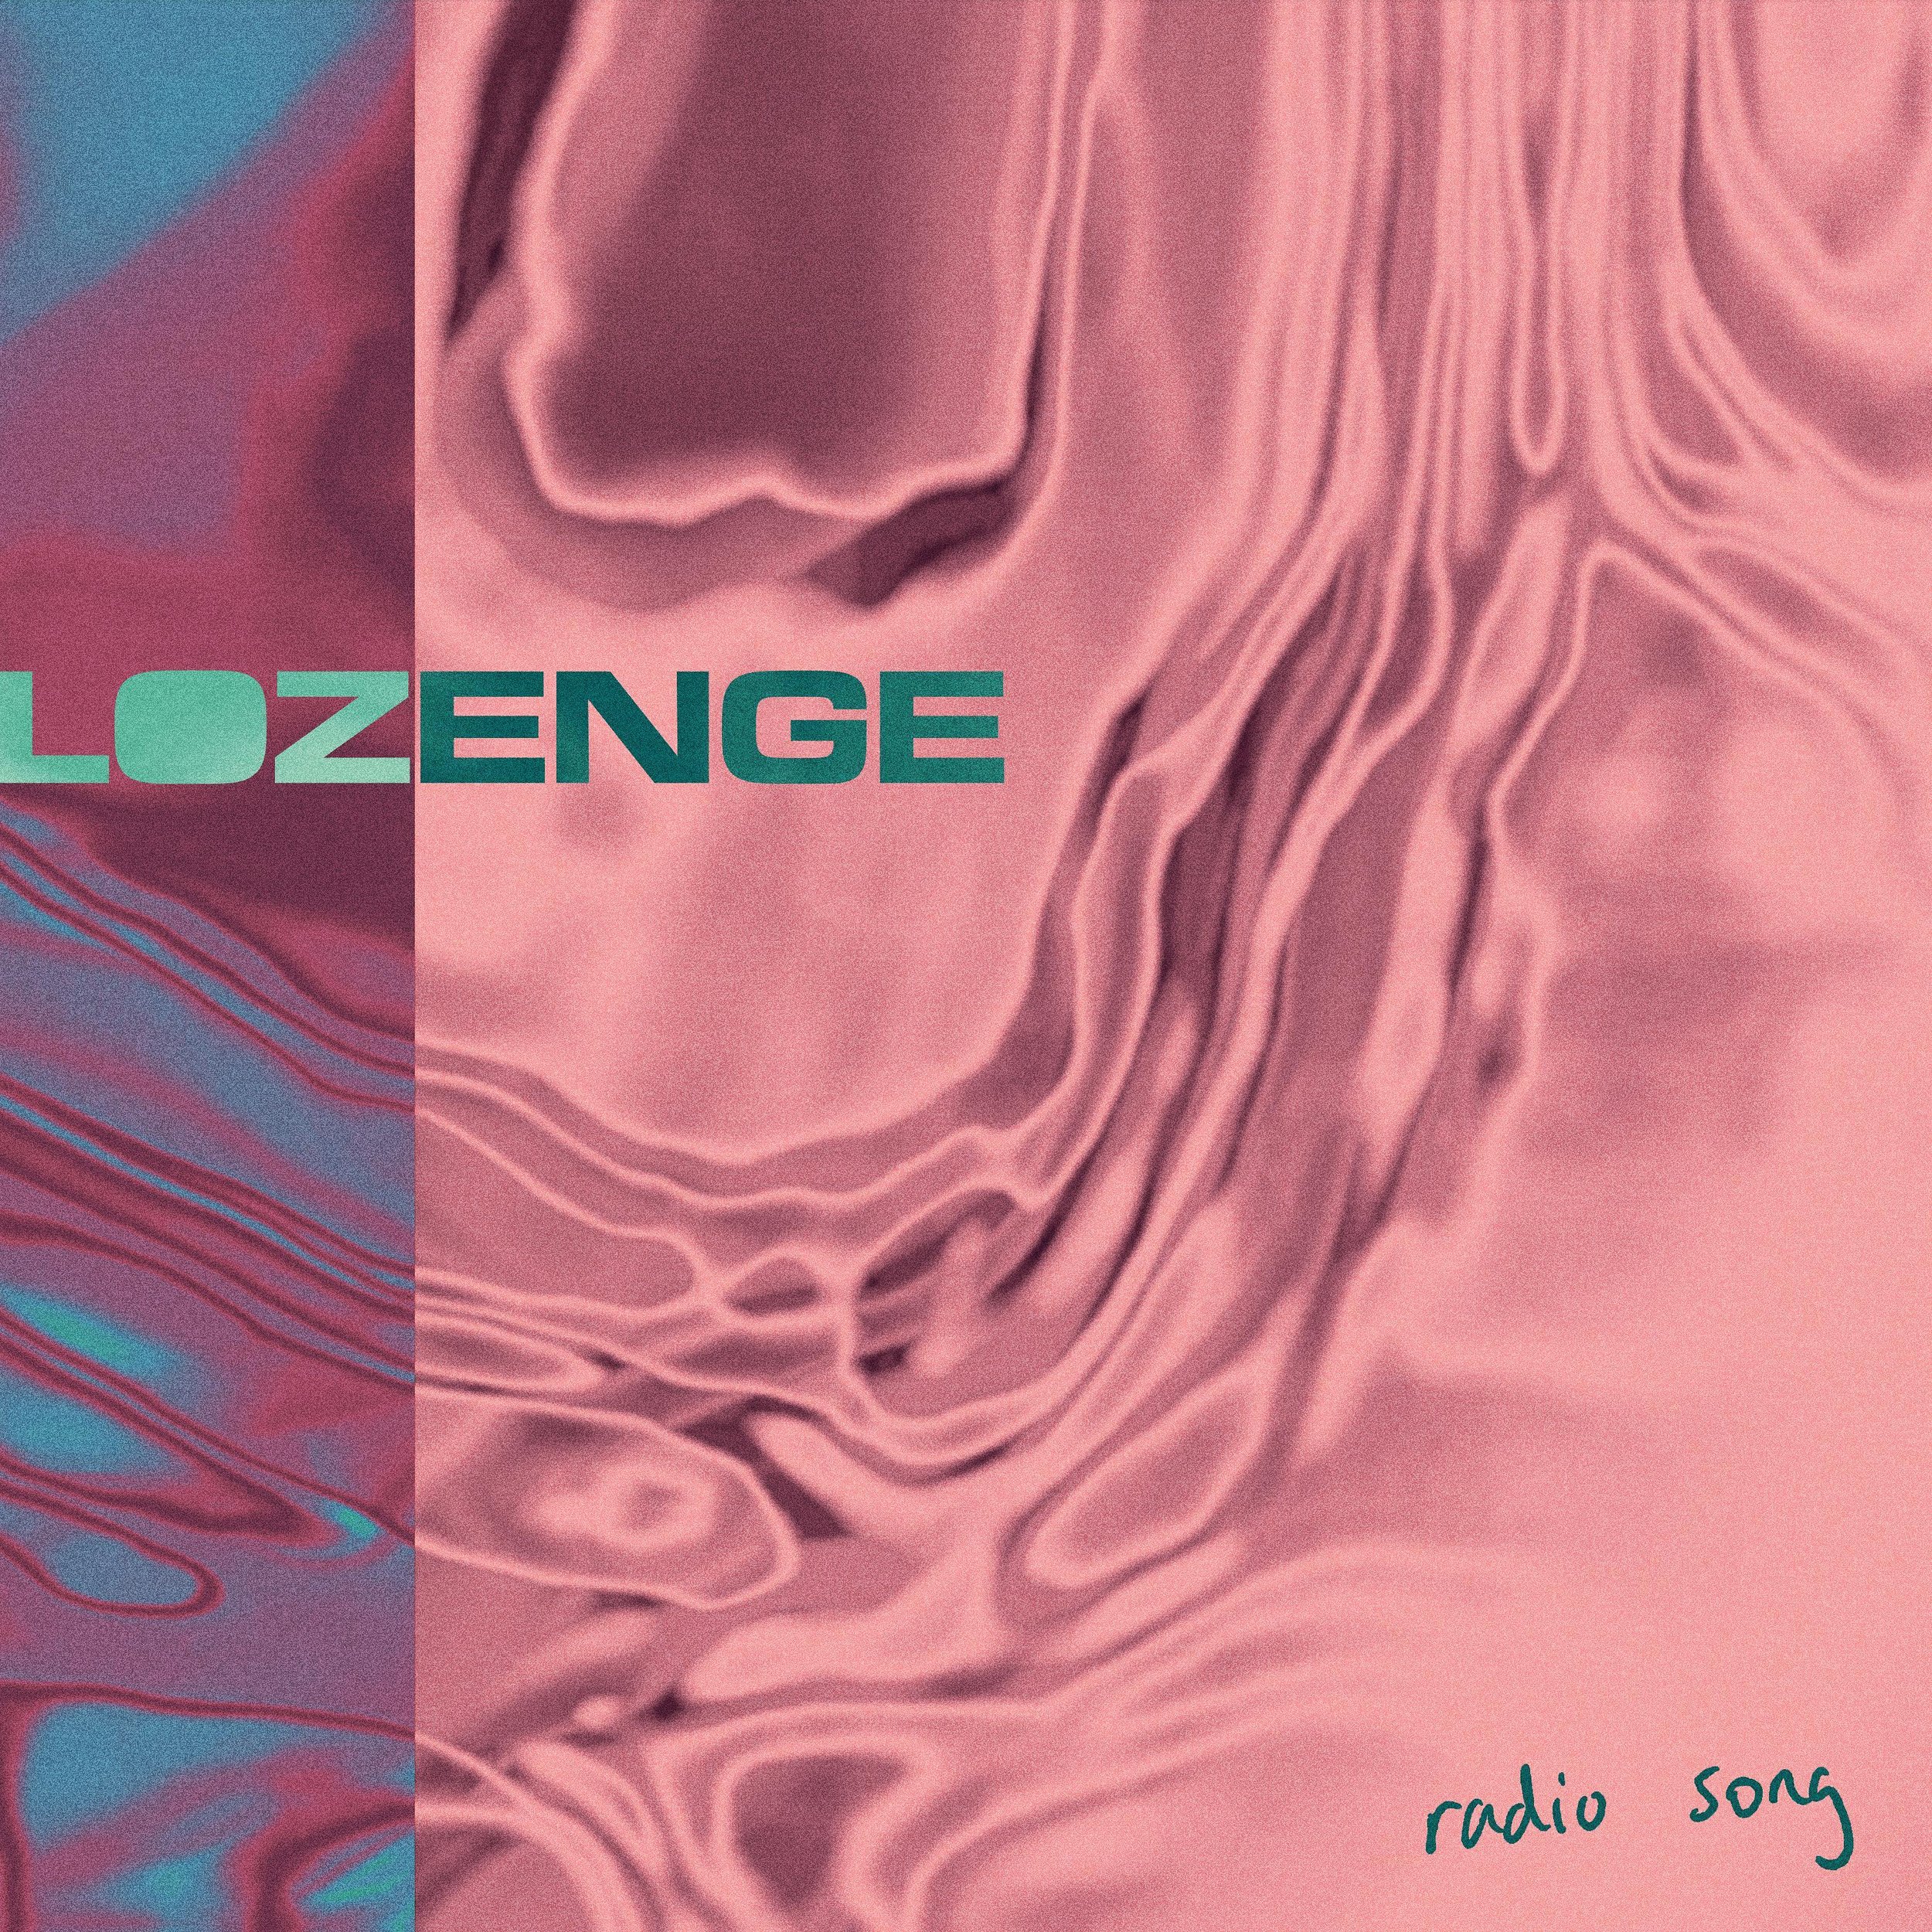 Lozenge - Radio Song. Released Friday 12th April 2024. 

A Nu-Gaze band from Leeds, UK, Lozenge place layers of distorted guitars and whispered vocals on top of a muscular rhythm section in songs that explore themes of alienation and personal identit